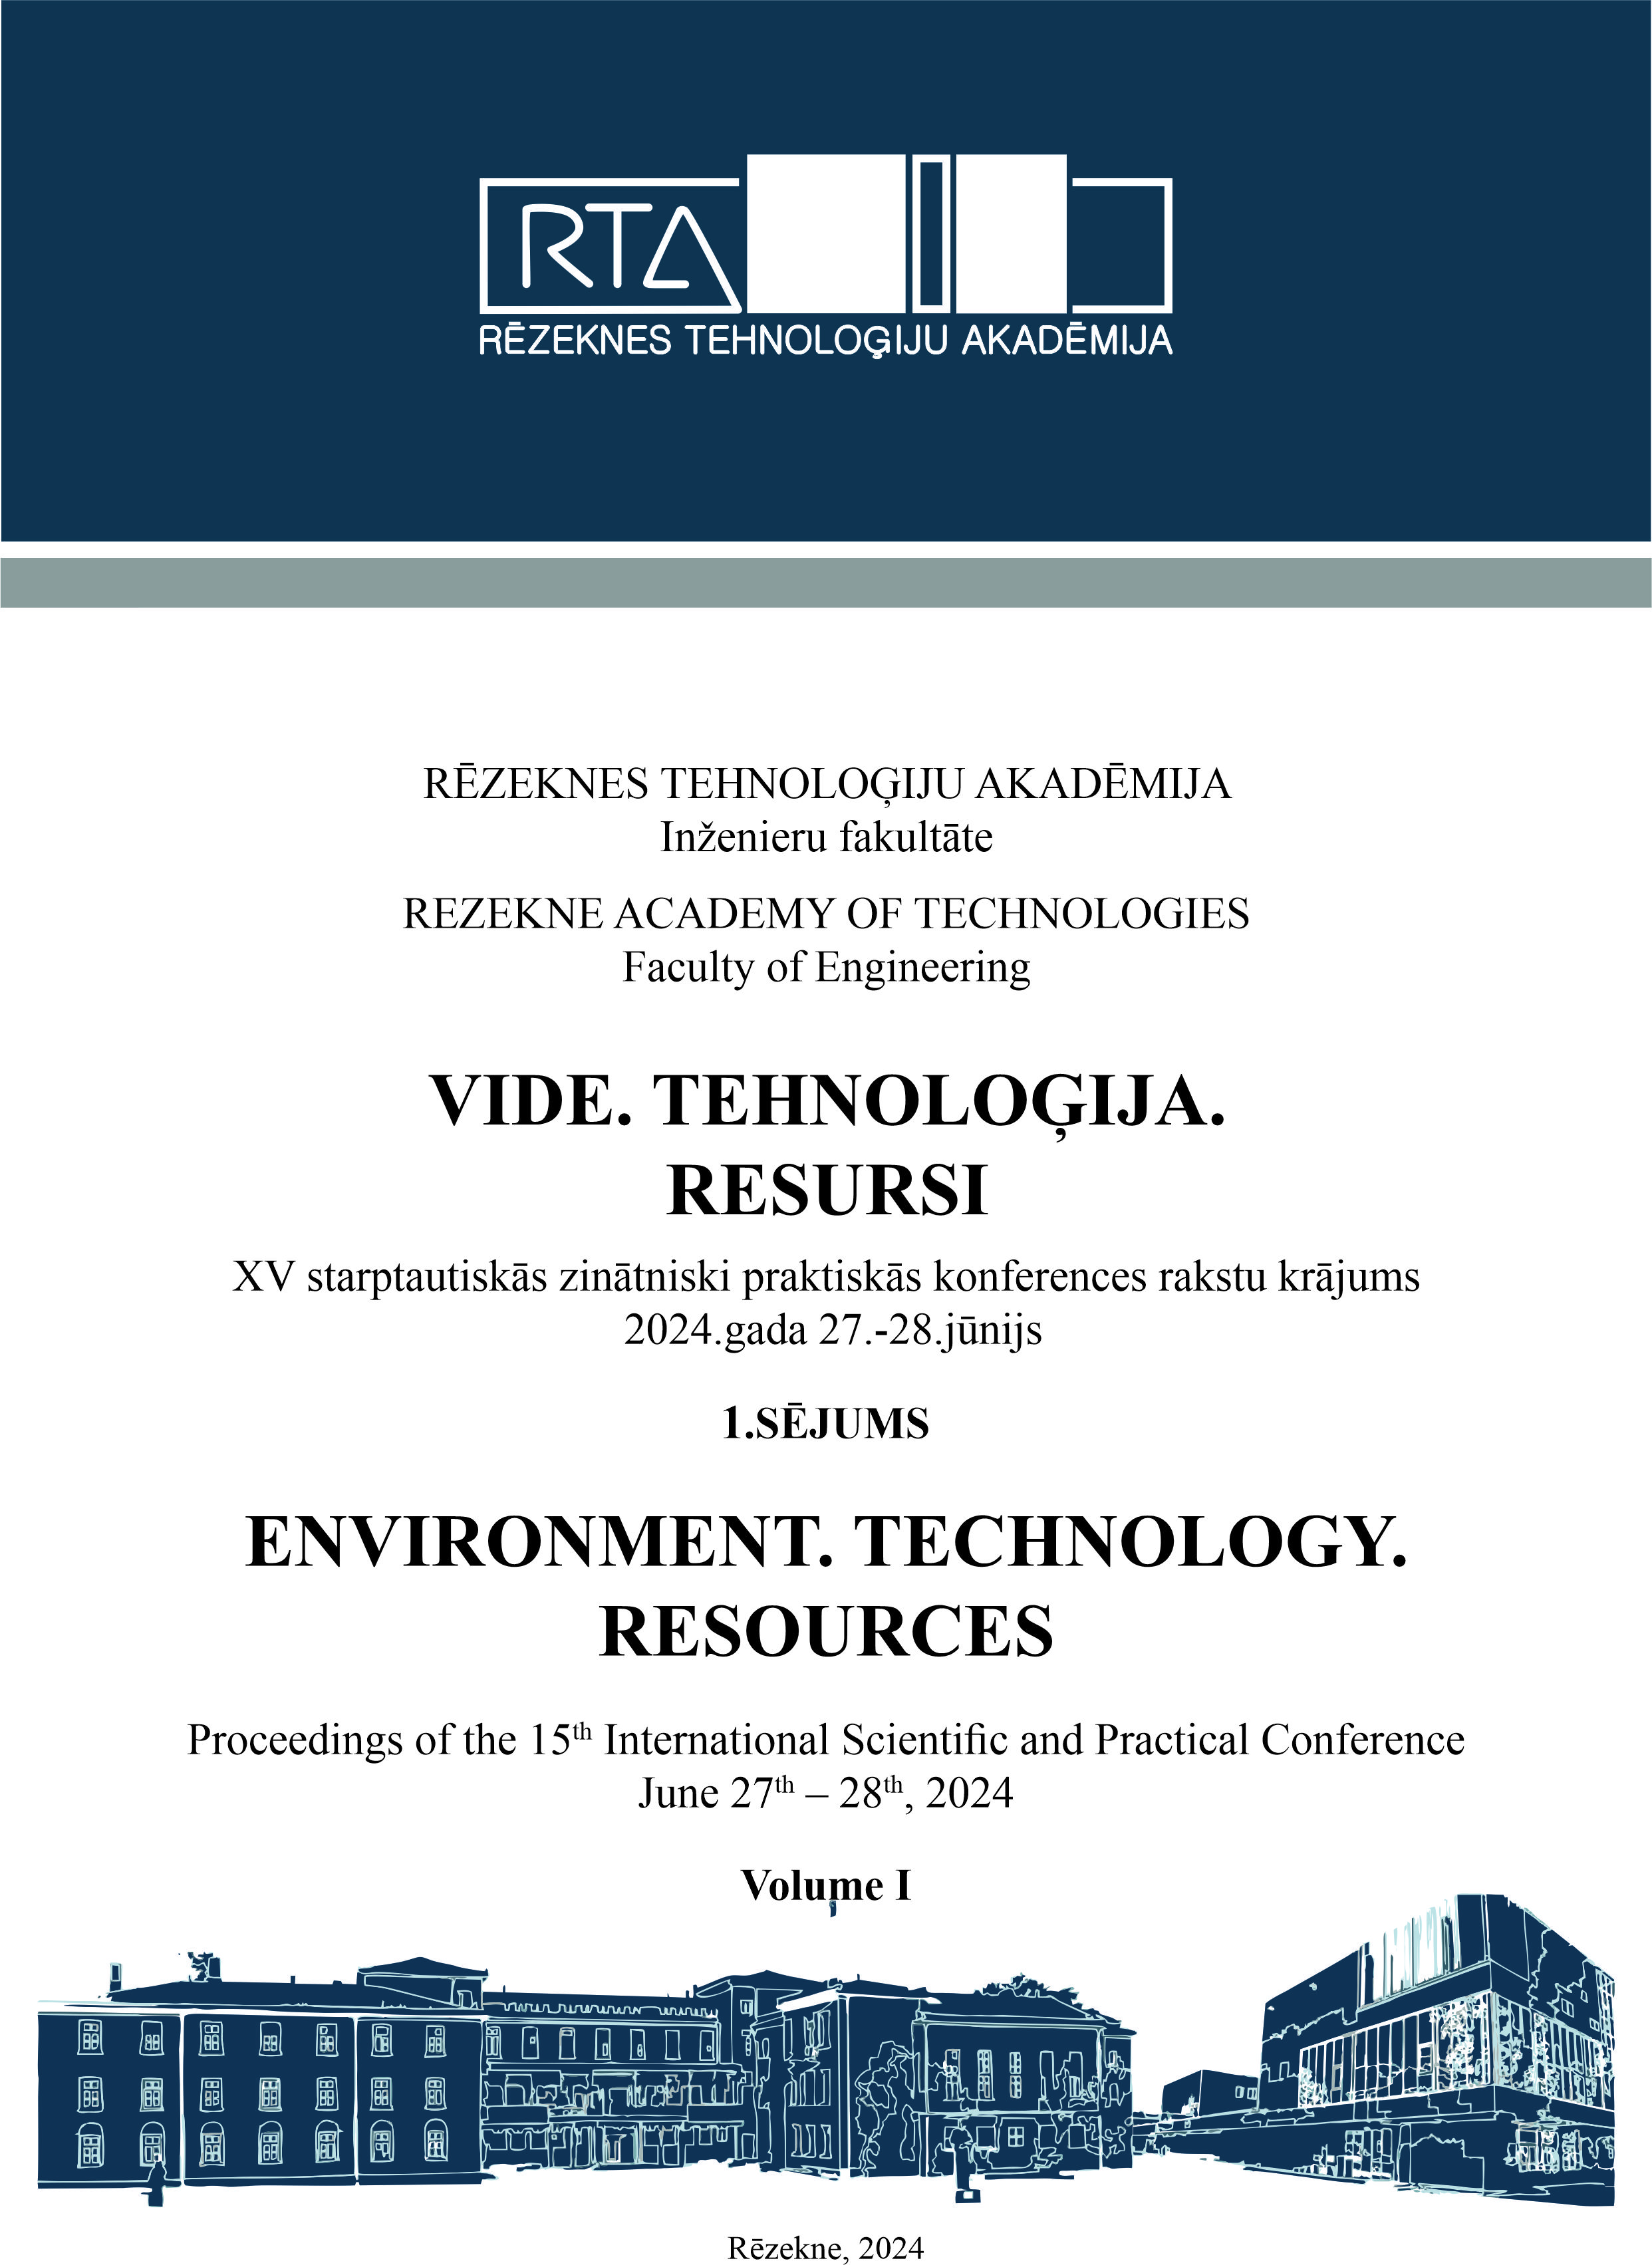 					View Vol. 1 (2024): Environment. Technology. Resources. Proceedings of the 15th International Scientific and Practical Conference. Volume 1
				